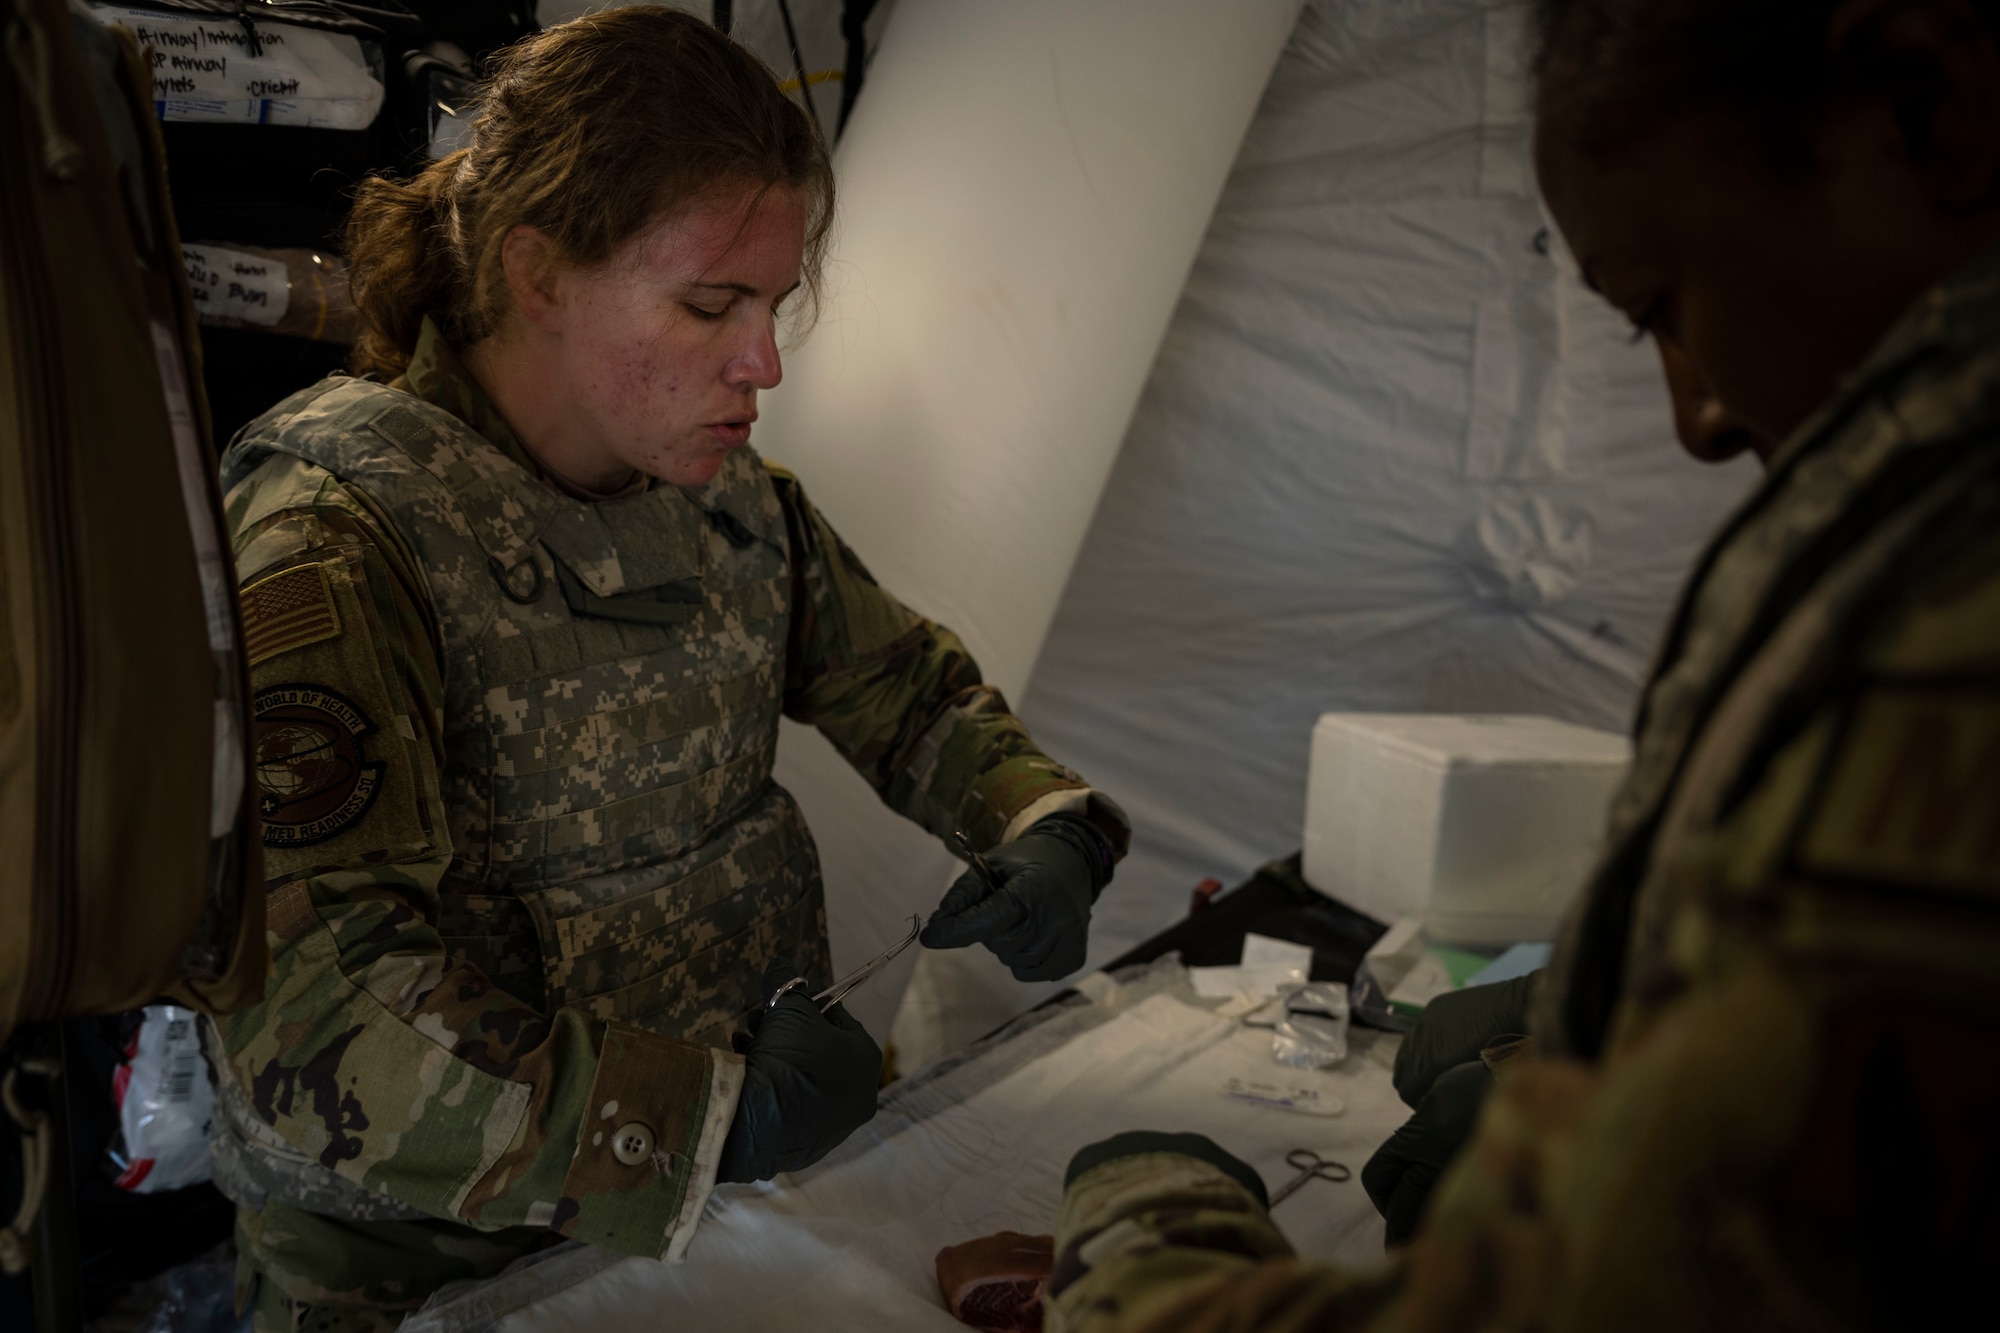 Capt. Karen Rodriguez, left, 4th Operational Medical Readiness Squadron flight doctor teaches Maj. Early Rice, 4th Medical Group nurse, how to administer sutures during Agile Cub 4 at Marine Corps Air Station Cherry Point, North Carolina, March 7, 2023. This agile combat employment exercise shifts the generation of airpower from large, centralized bases to networks of smaller, dispersed locations.